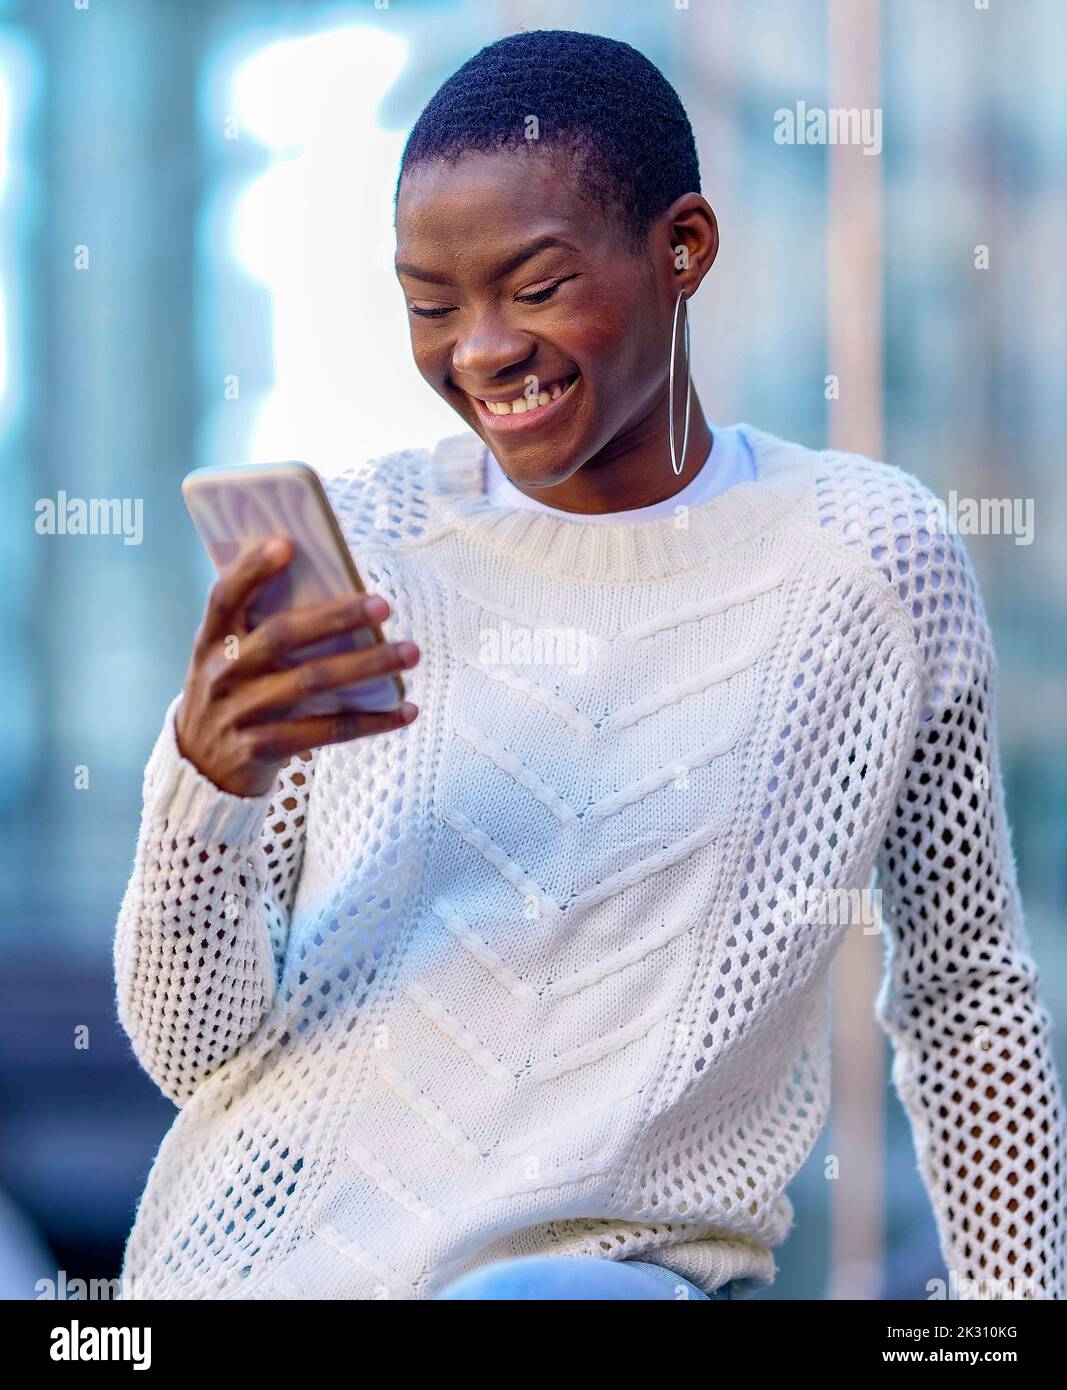 Woman wearing hoop earring looking at smart phone and smiling Stock Photo